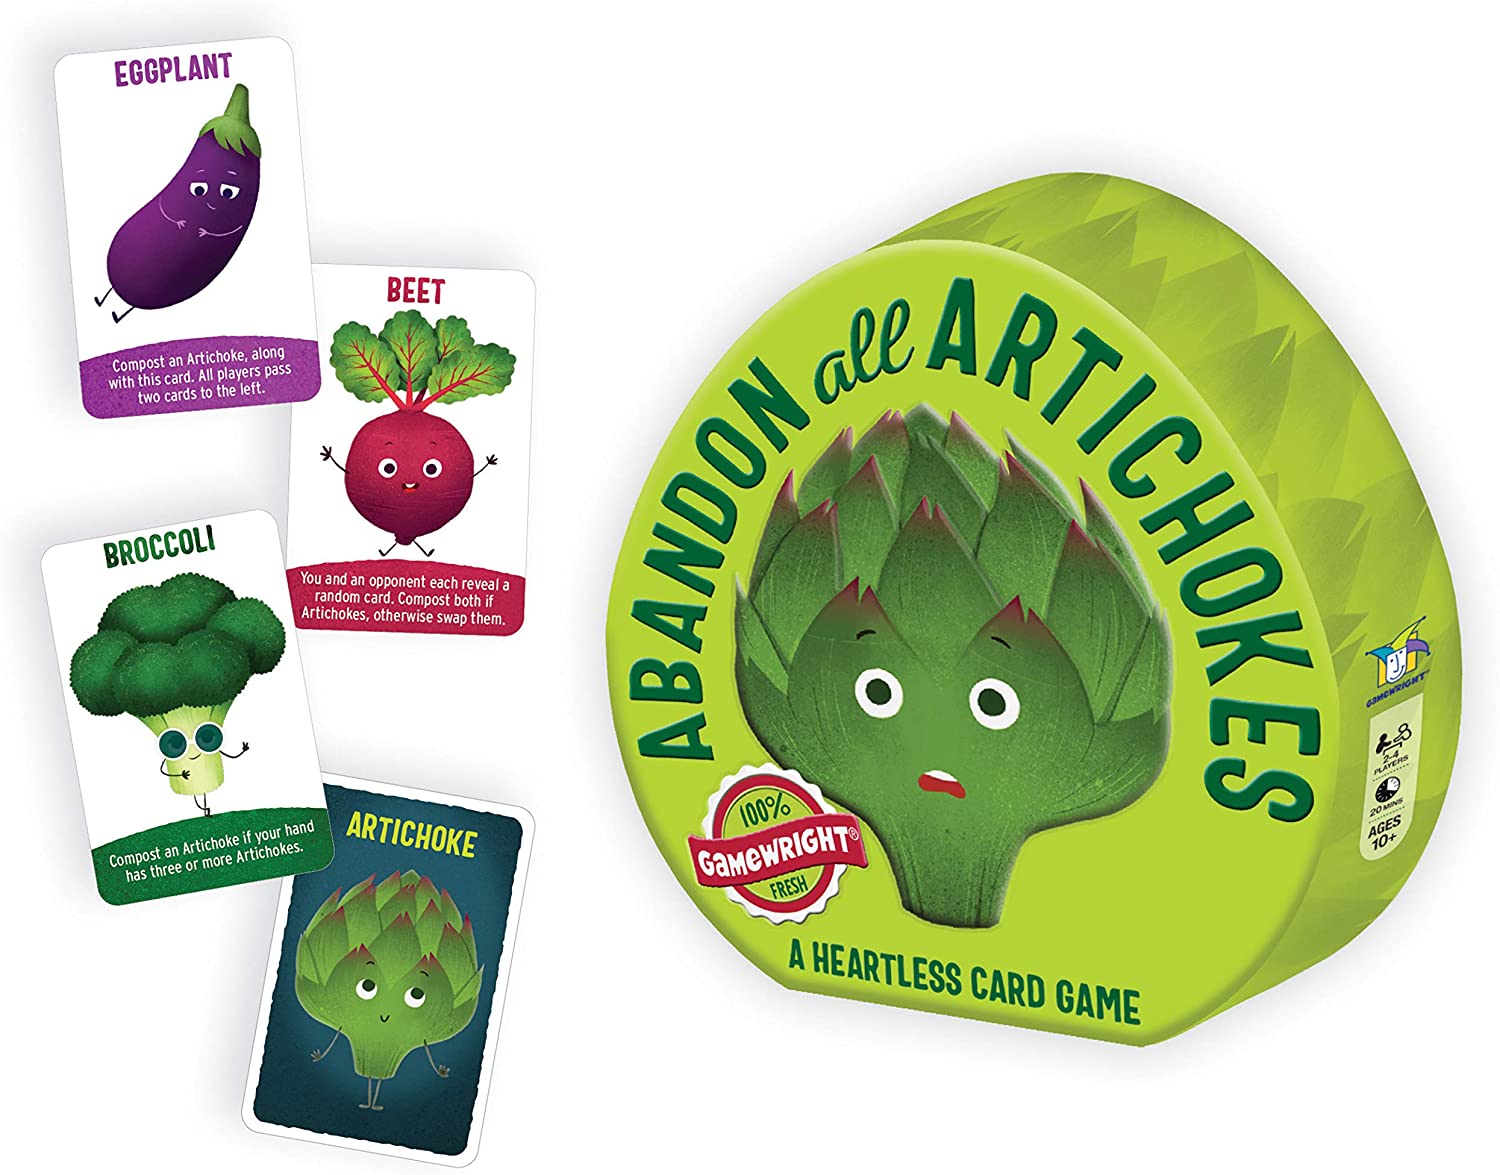 Green rounded box with a cartoon artichoke, displayed with text "Abandon all artichokes." Also displayed are cards of anthropomorphic vegetables.